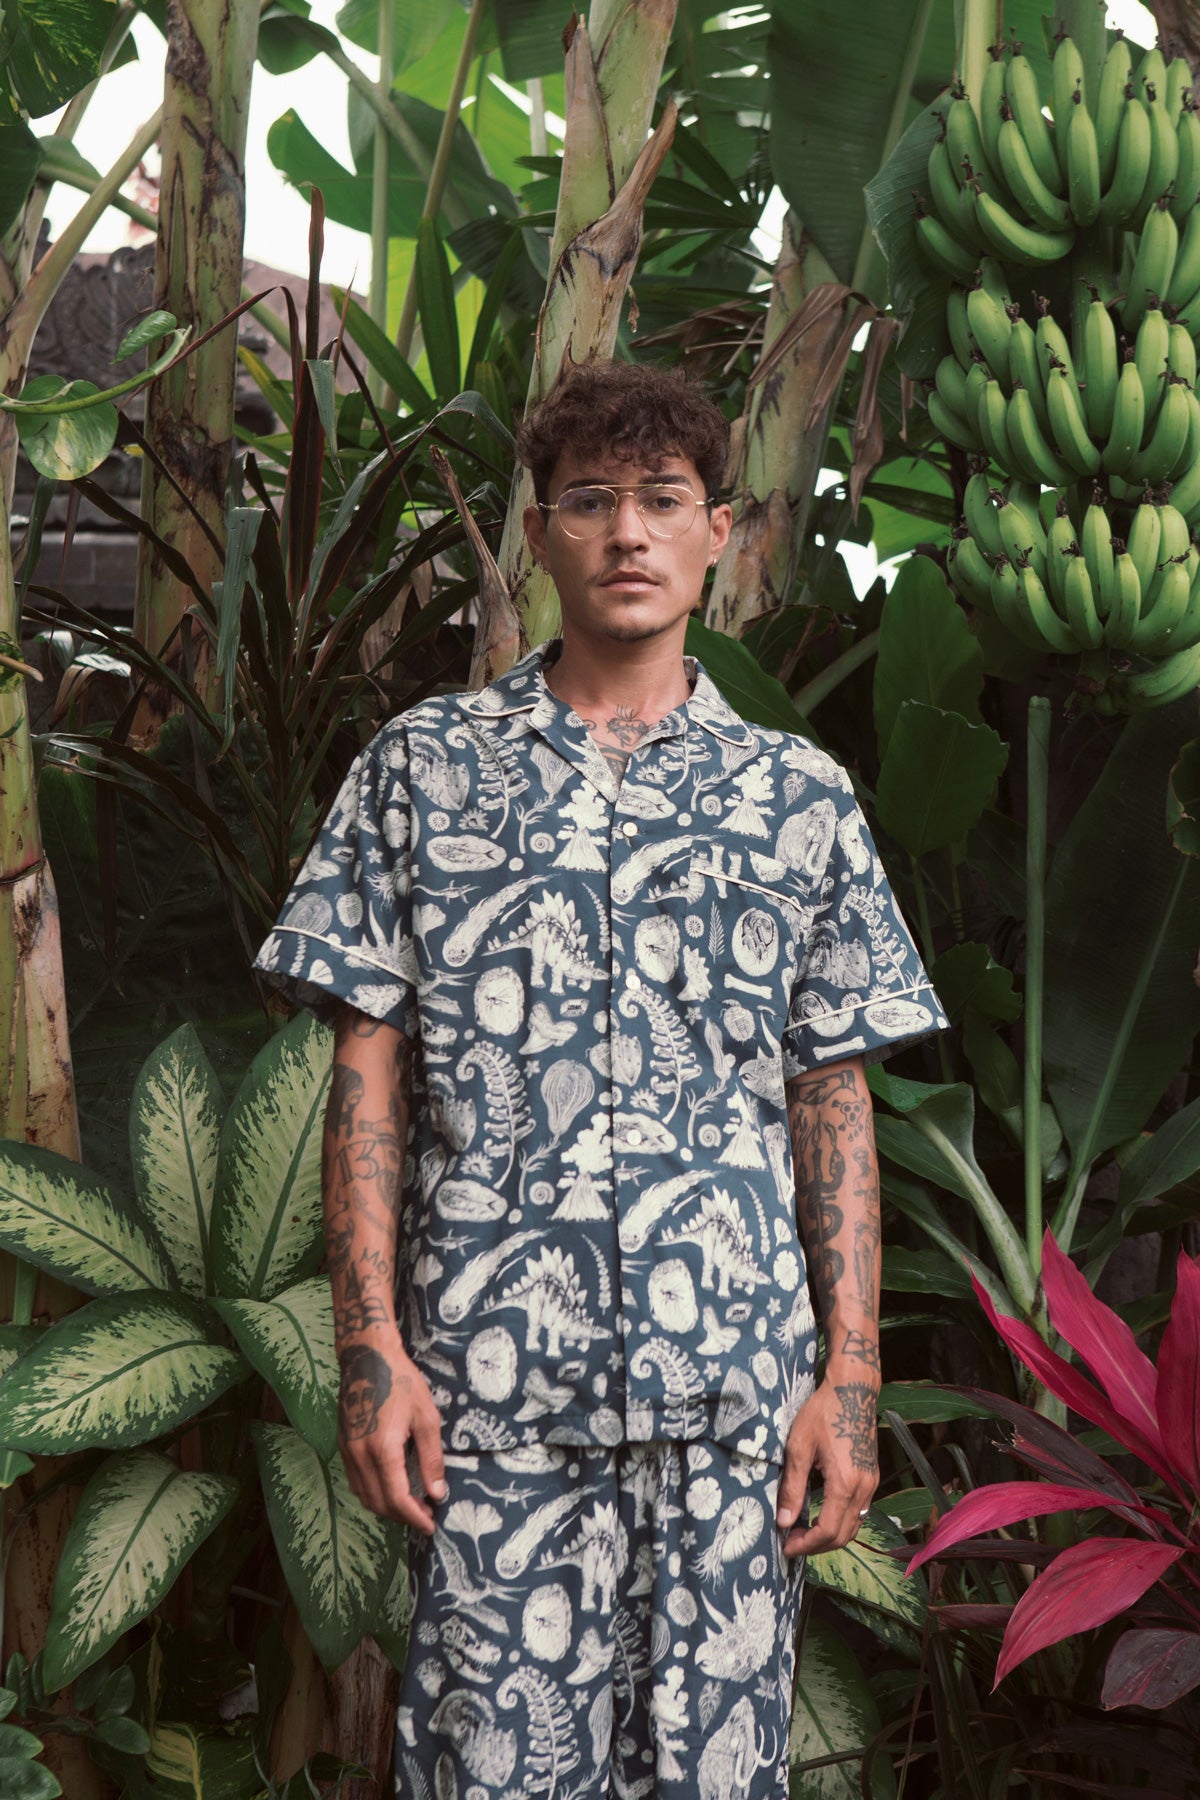 Load image into Gallery viewer, Inspired by the beautiful prehistoric dinosaurier illustration by Tattoo-Artist Suflanda this Mens Pyjama Set guarantes sweet dreams combined with vintage 60’s design.
